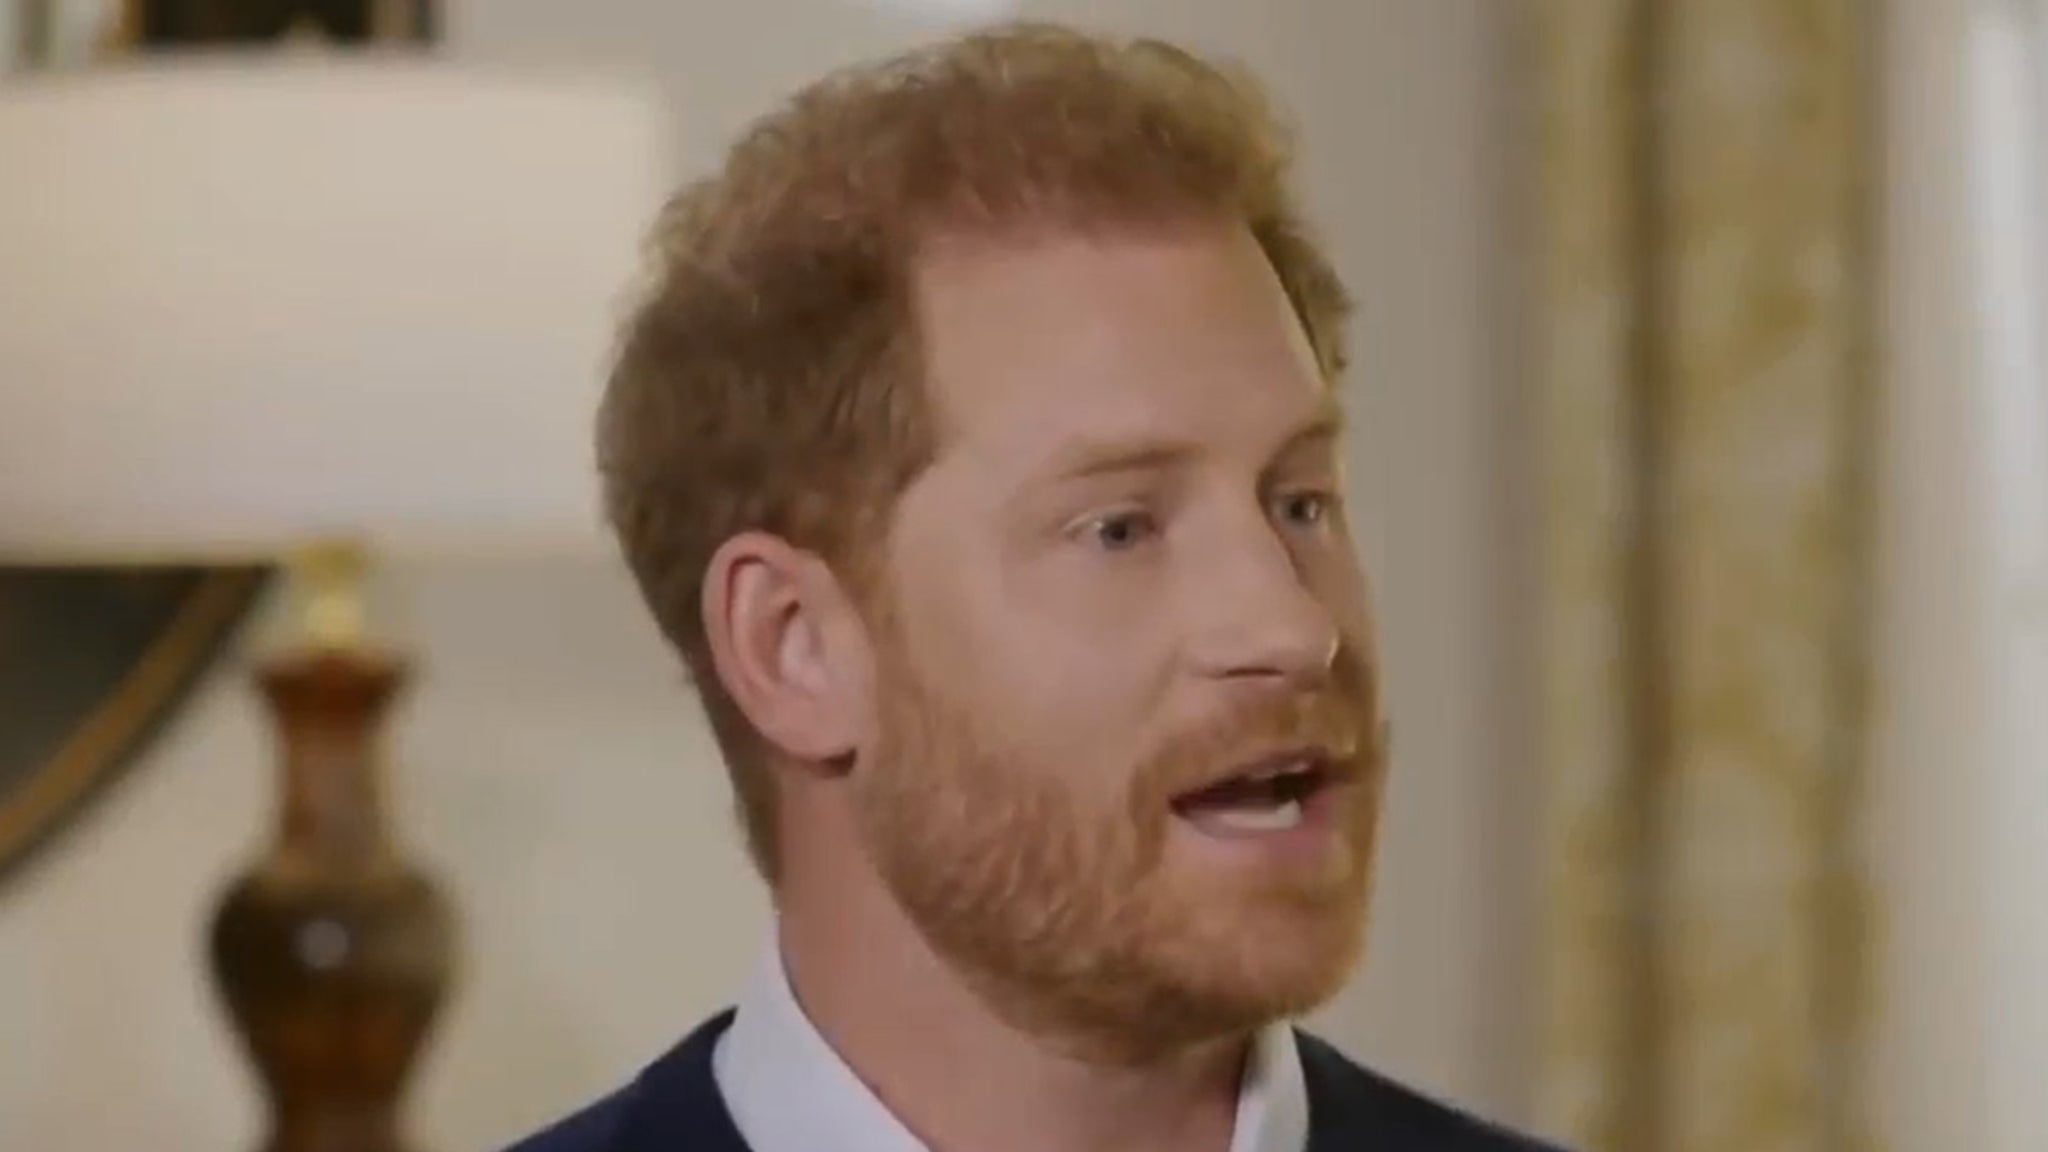 Prince Harry wants his brother and father back amid royal family drama